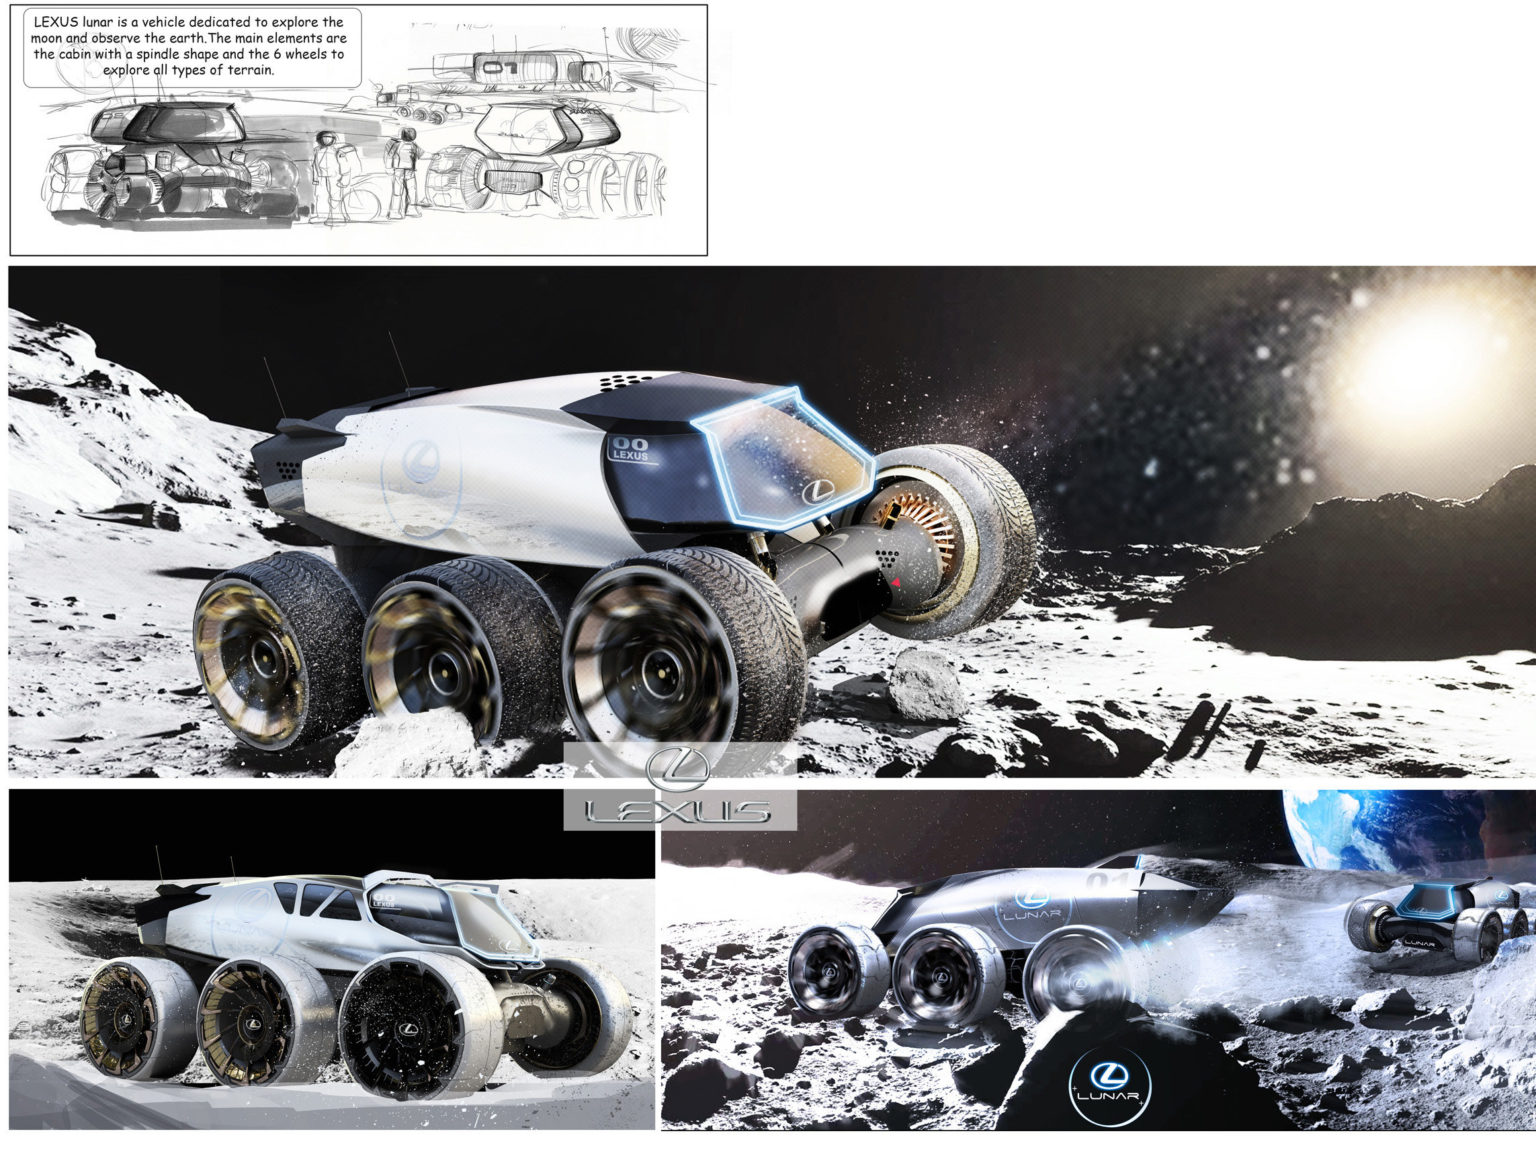 Lexus designers submitted their ideas for lunar mobility to Document Journal magazine.